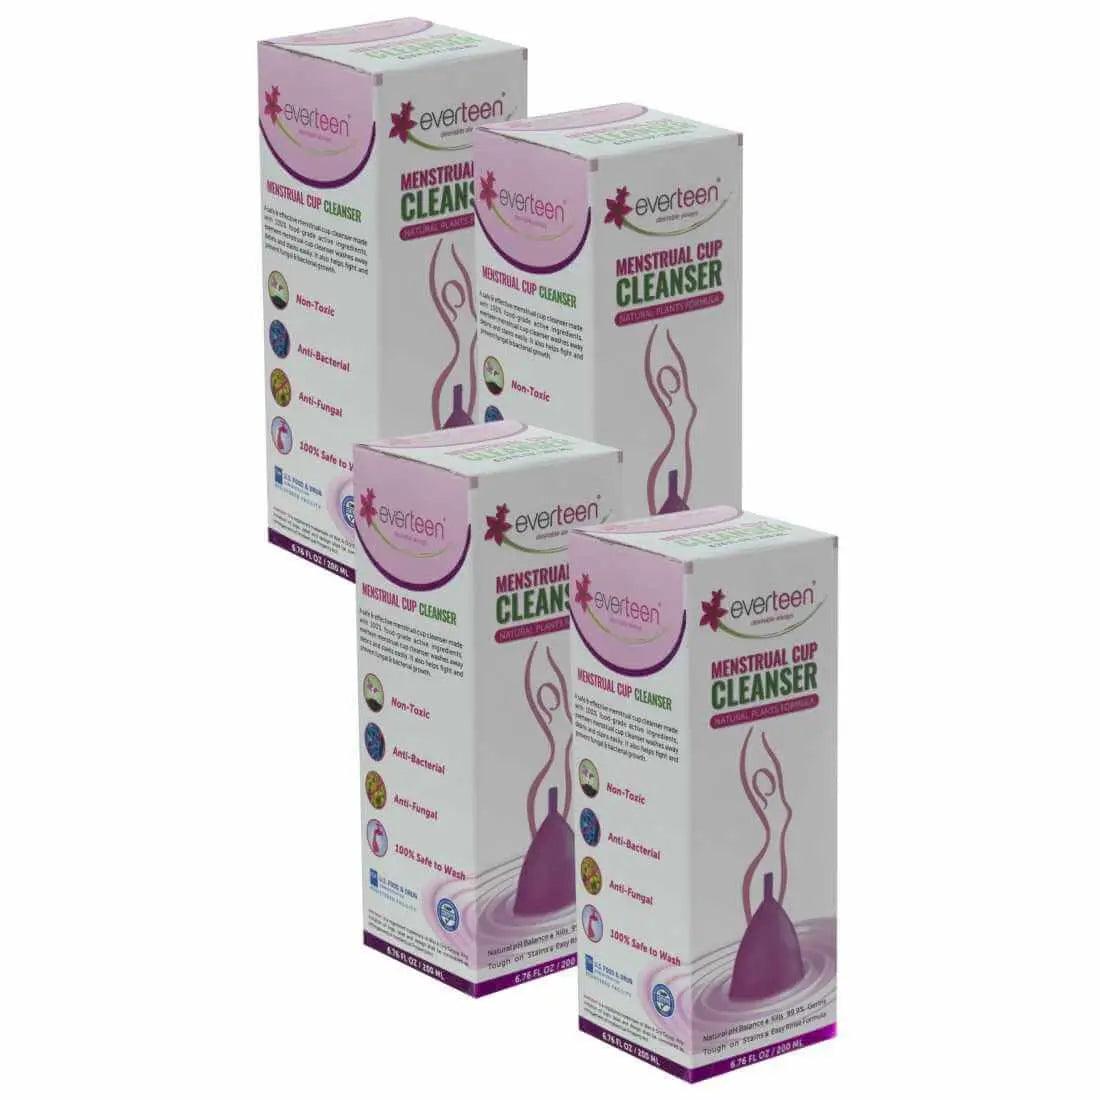 everteen Menstrual Cup Cleanser With Plants Based Formula for Women - 200 ml 8903540010954